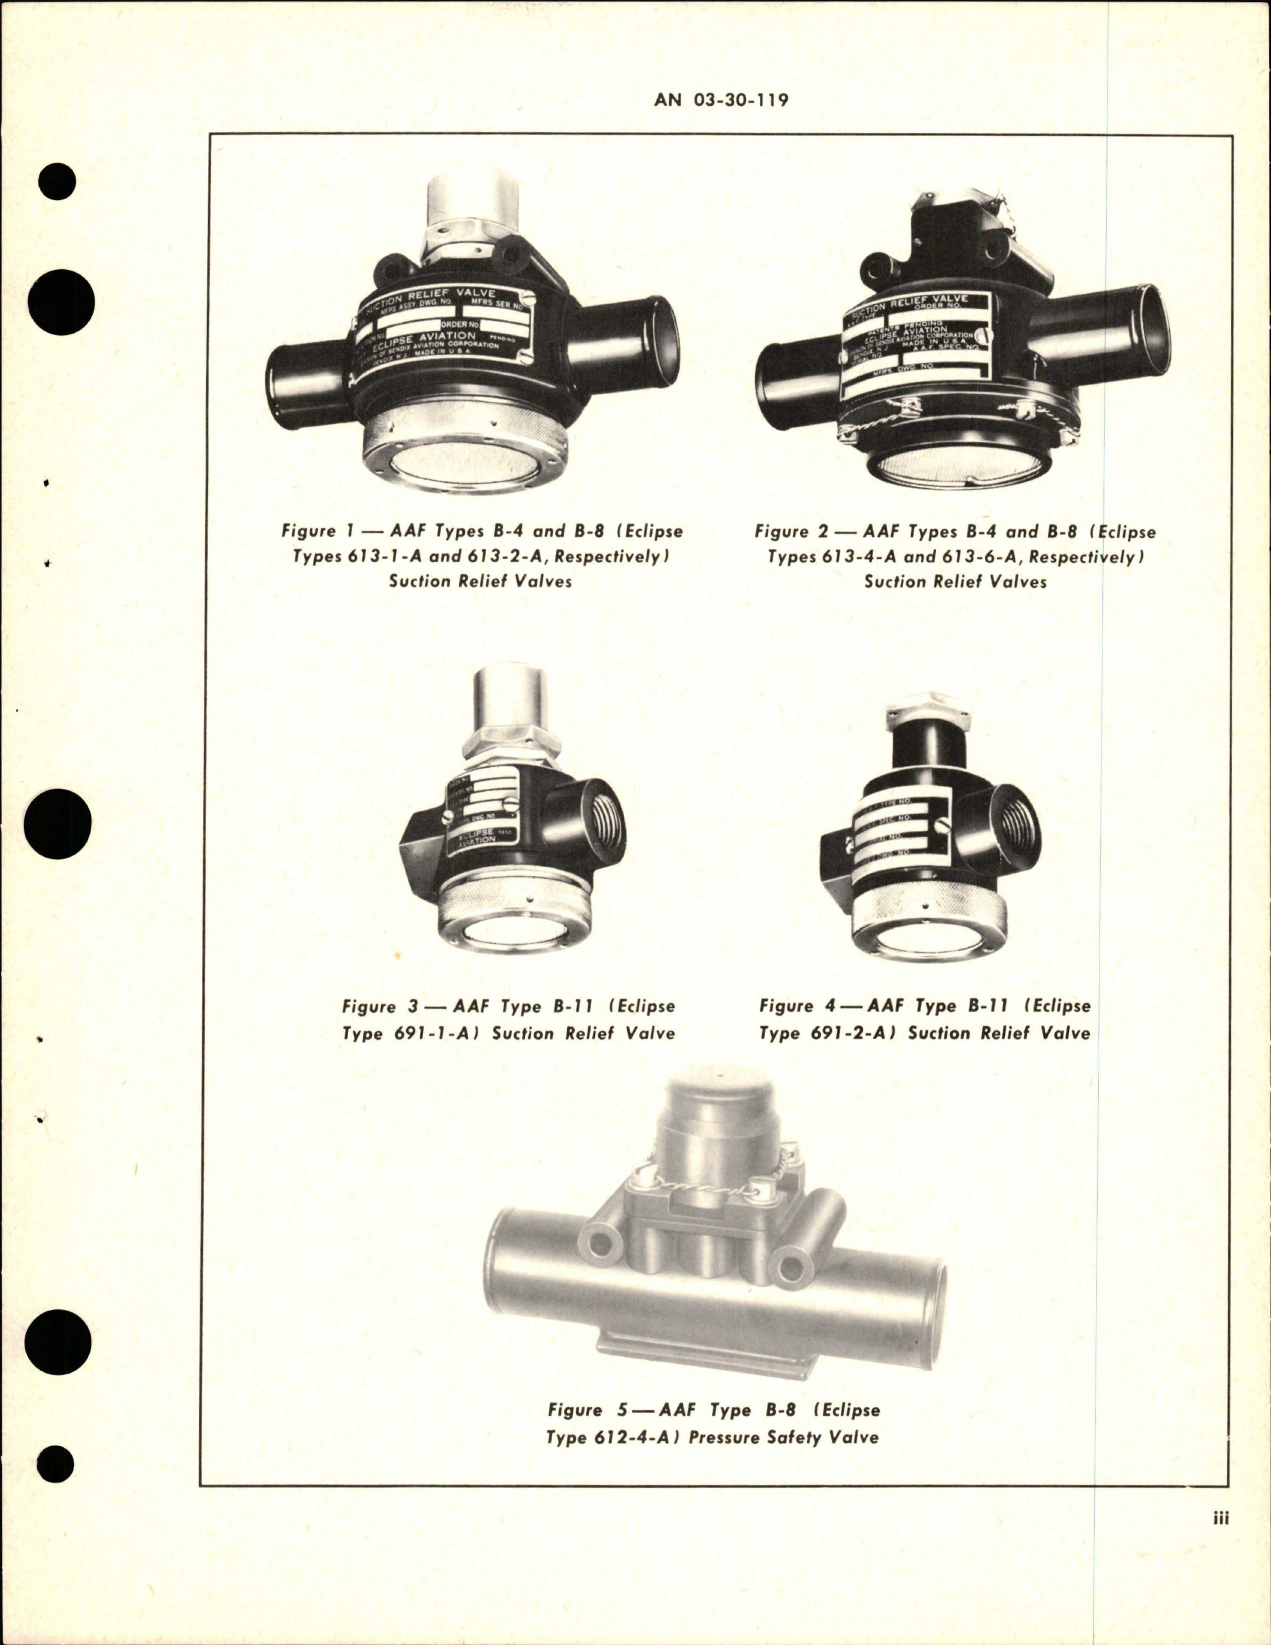 Sample page 5 from AirCorps Library document: Instructions with Parts Catalog for Pneumatic System Valves - Types B-4, B-8, B-11, and 612-7-A